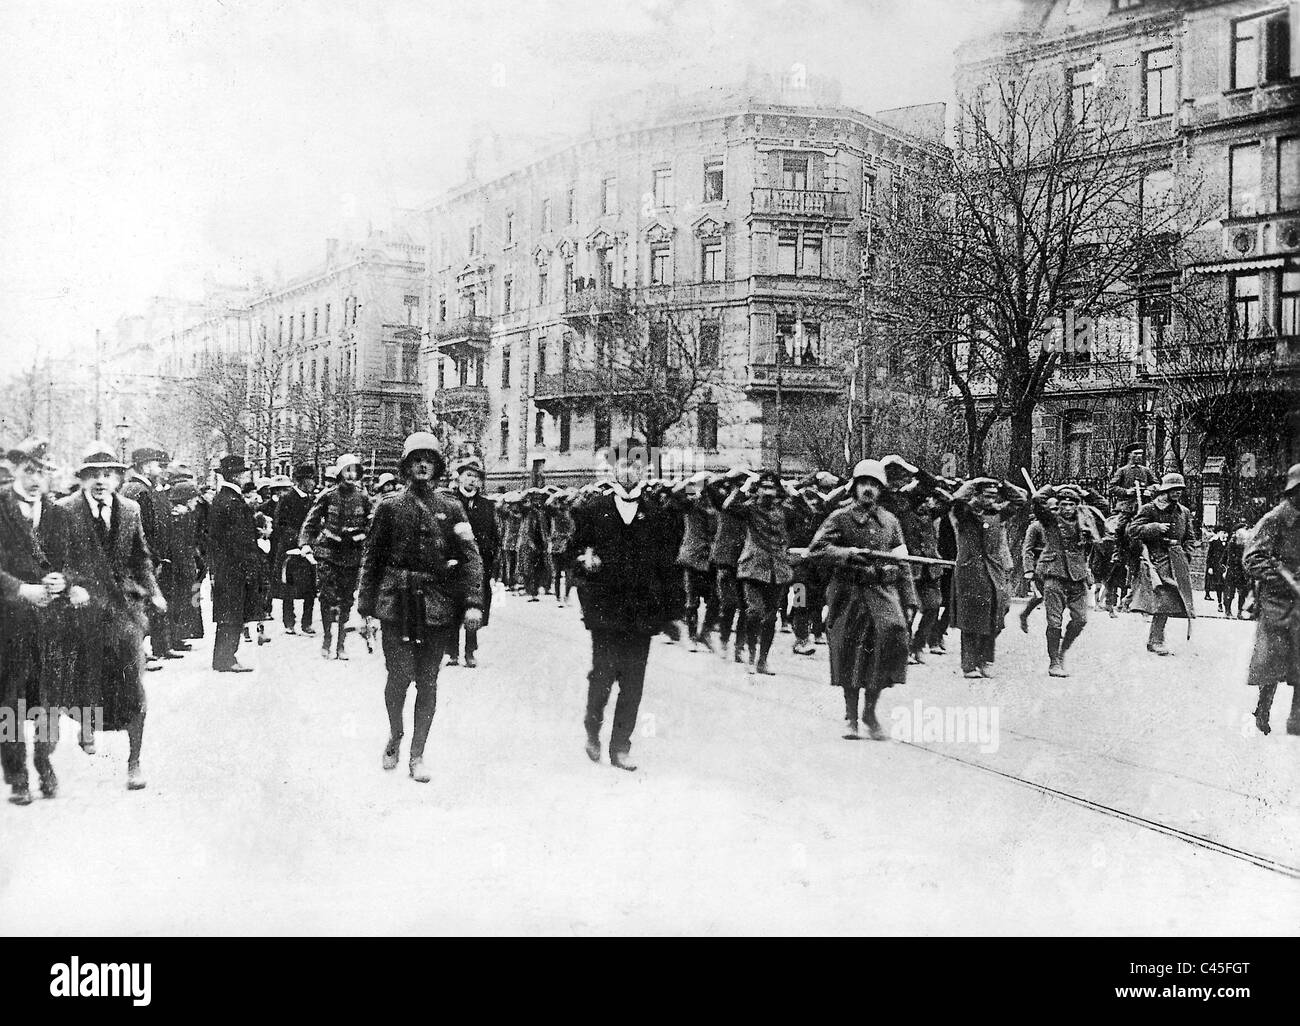 Government troops lead followers of the Bavarian Soviet Republic away, 1919 Stock Photo